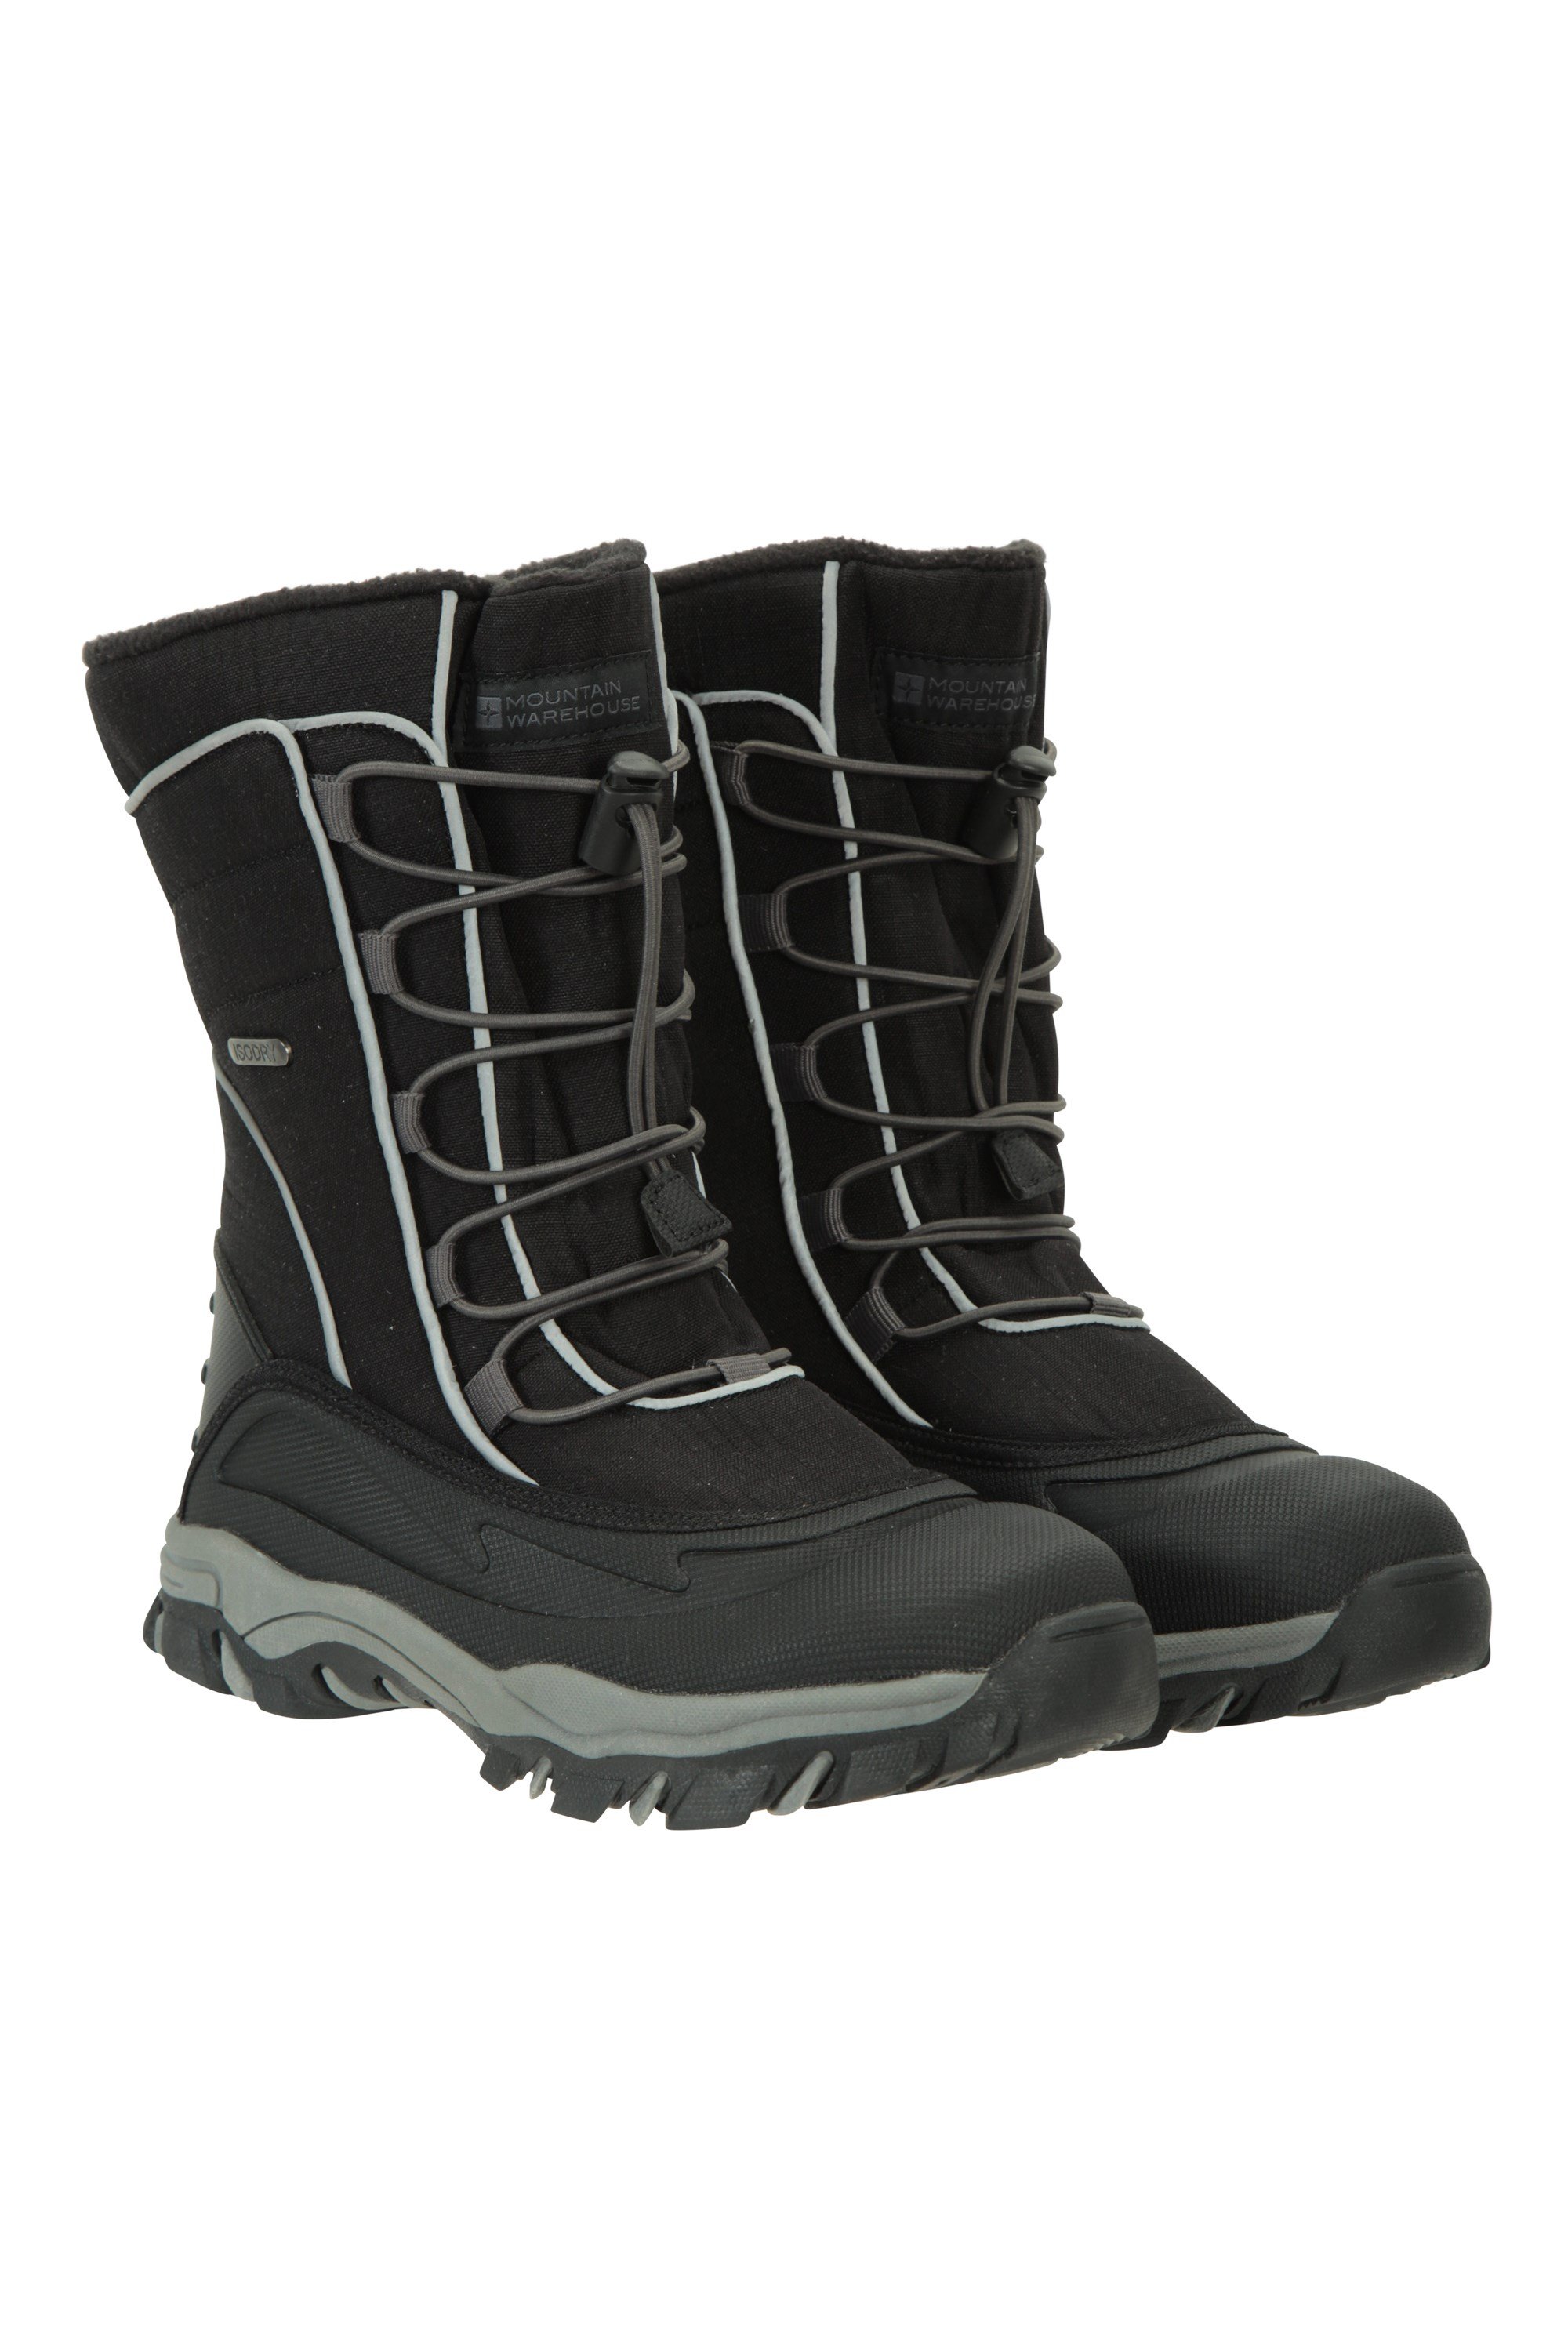 Park Youth Snow Boots - Black